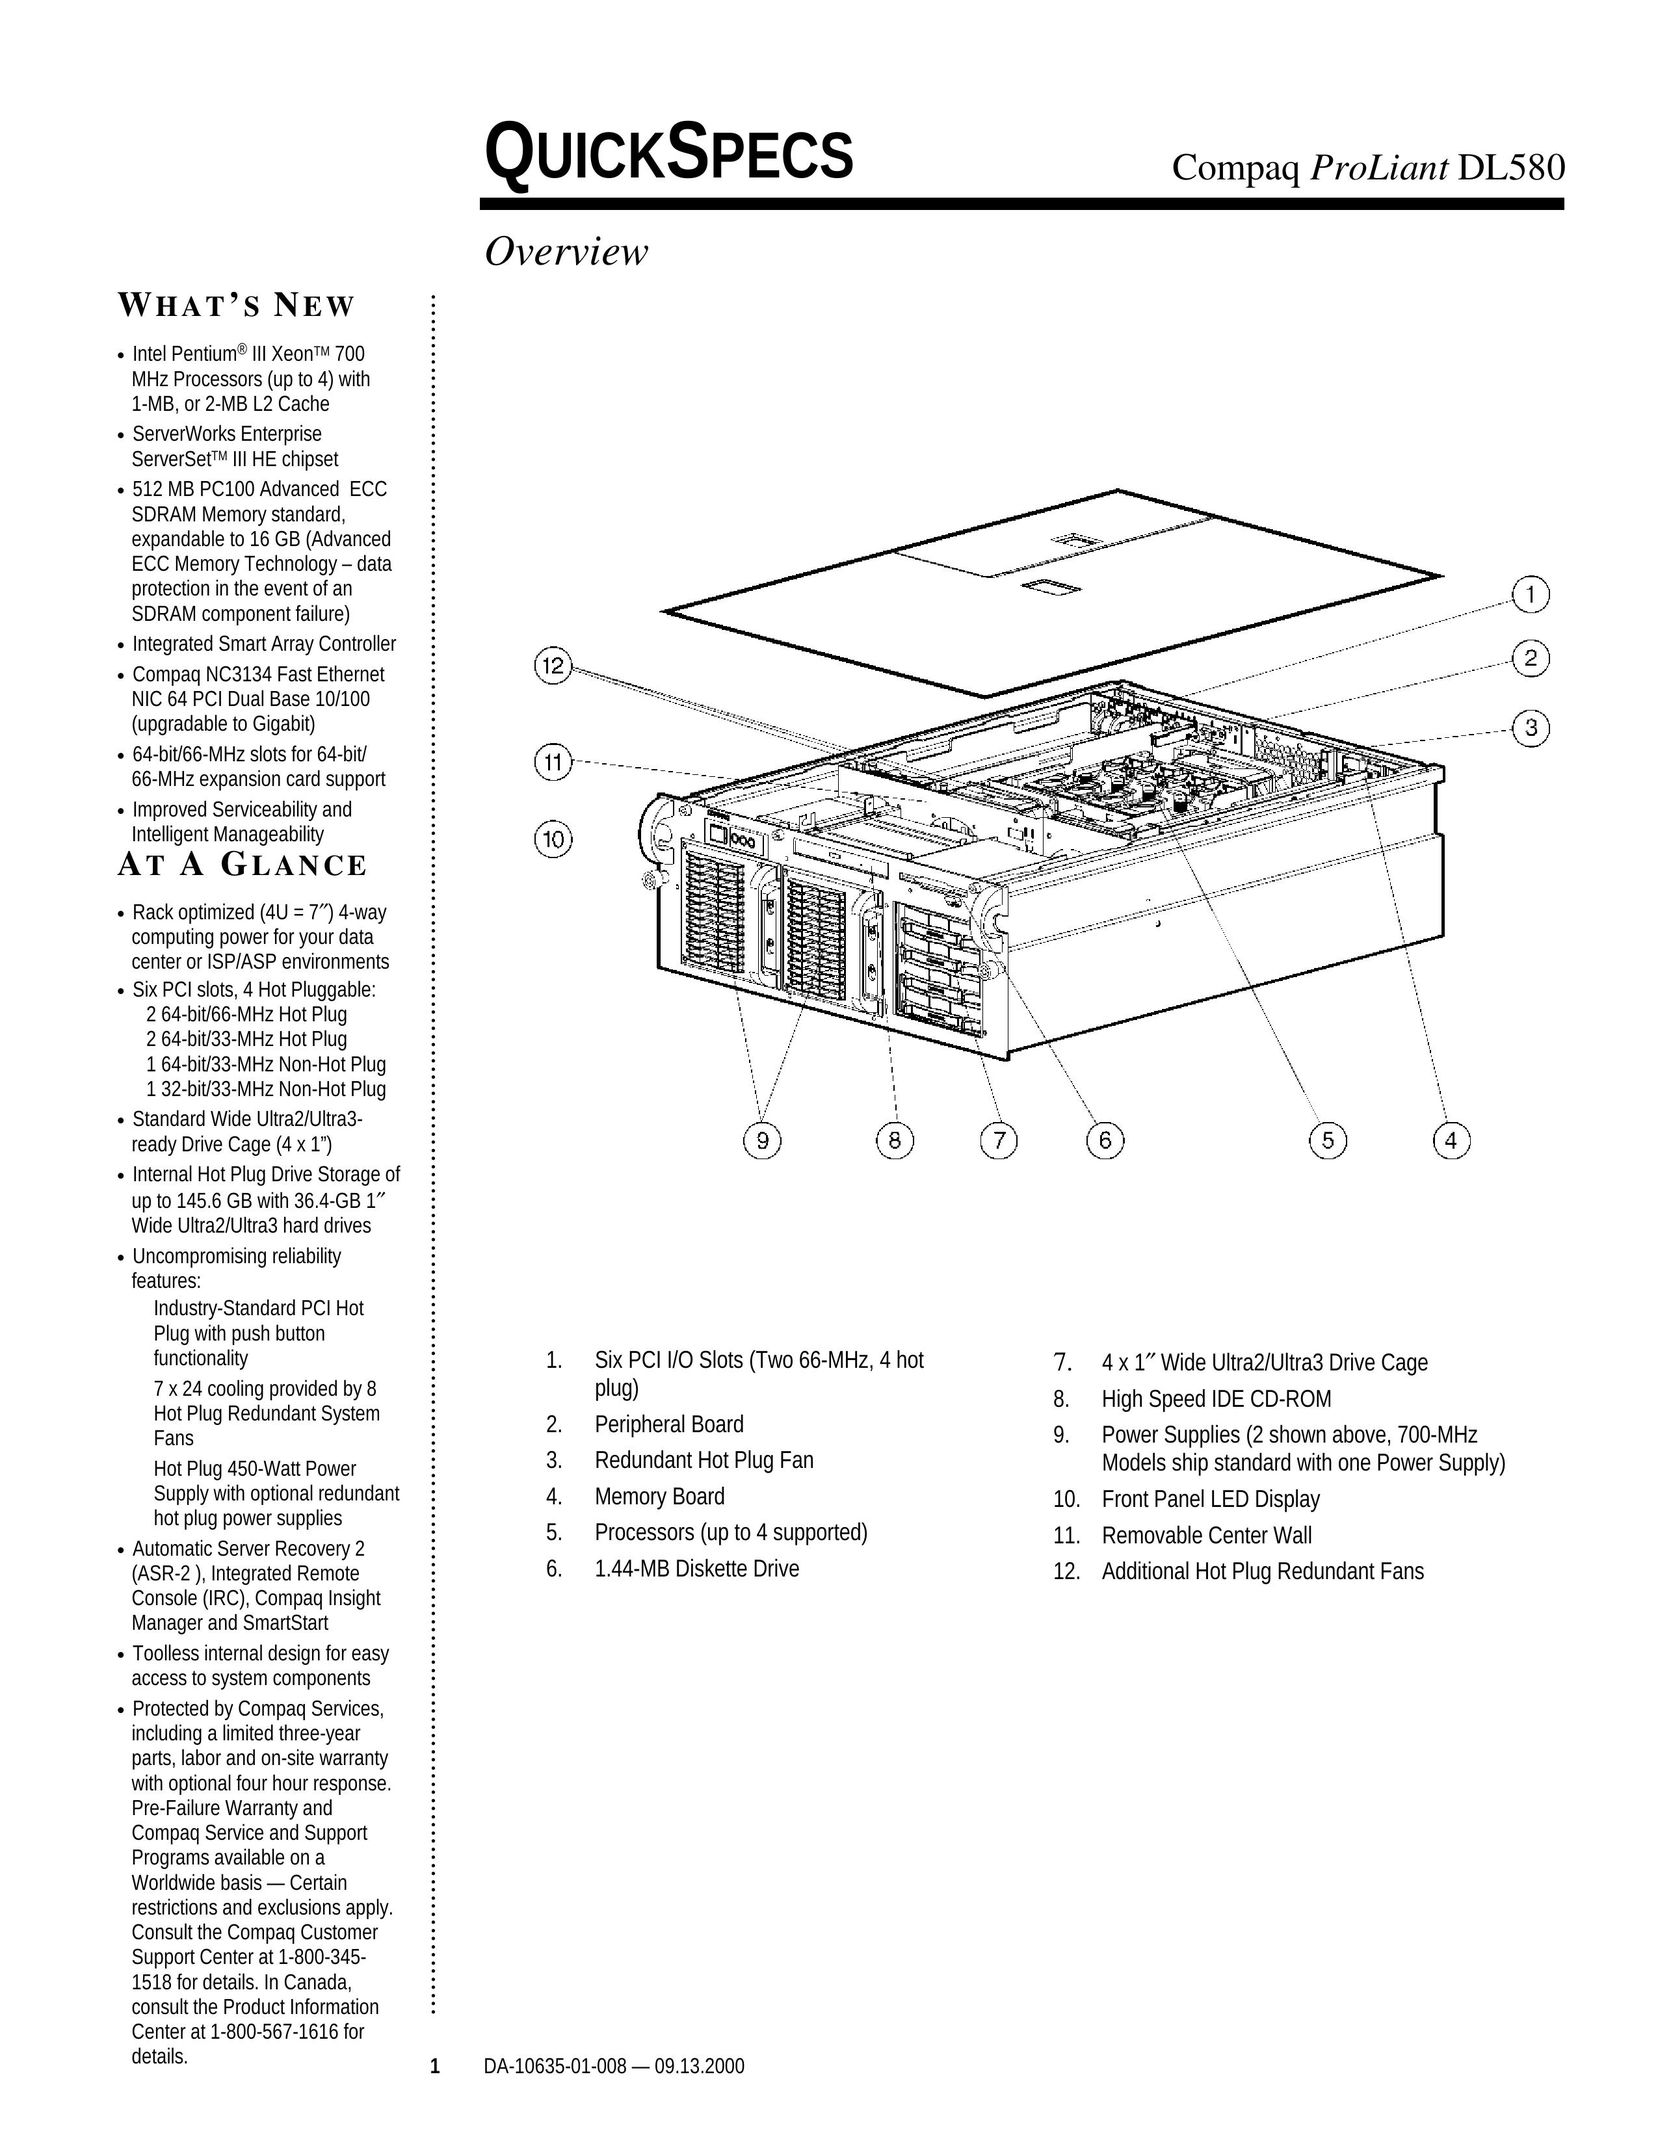 Compaq DL580 Stereo System User Manual